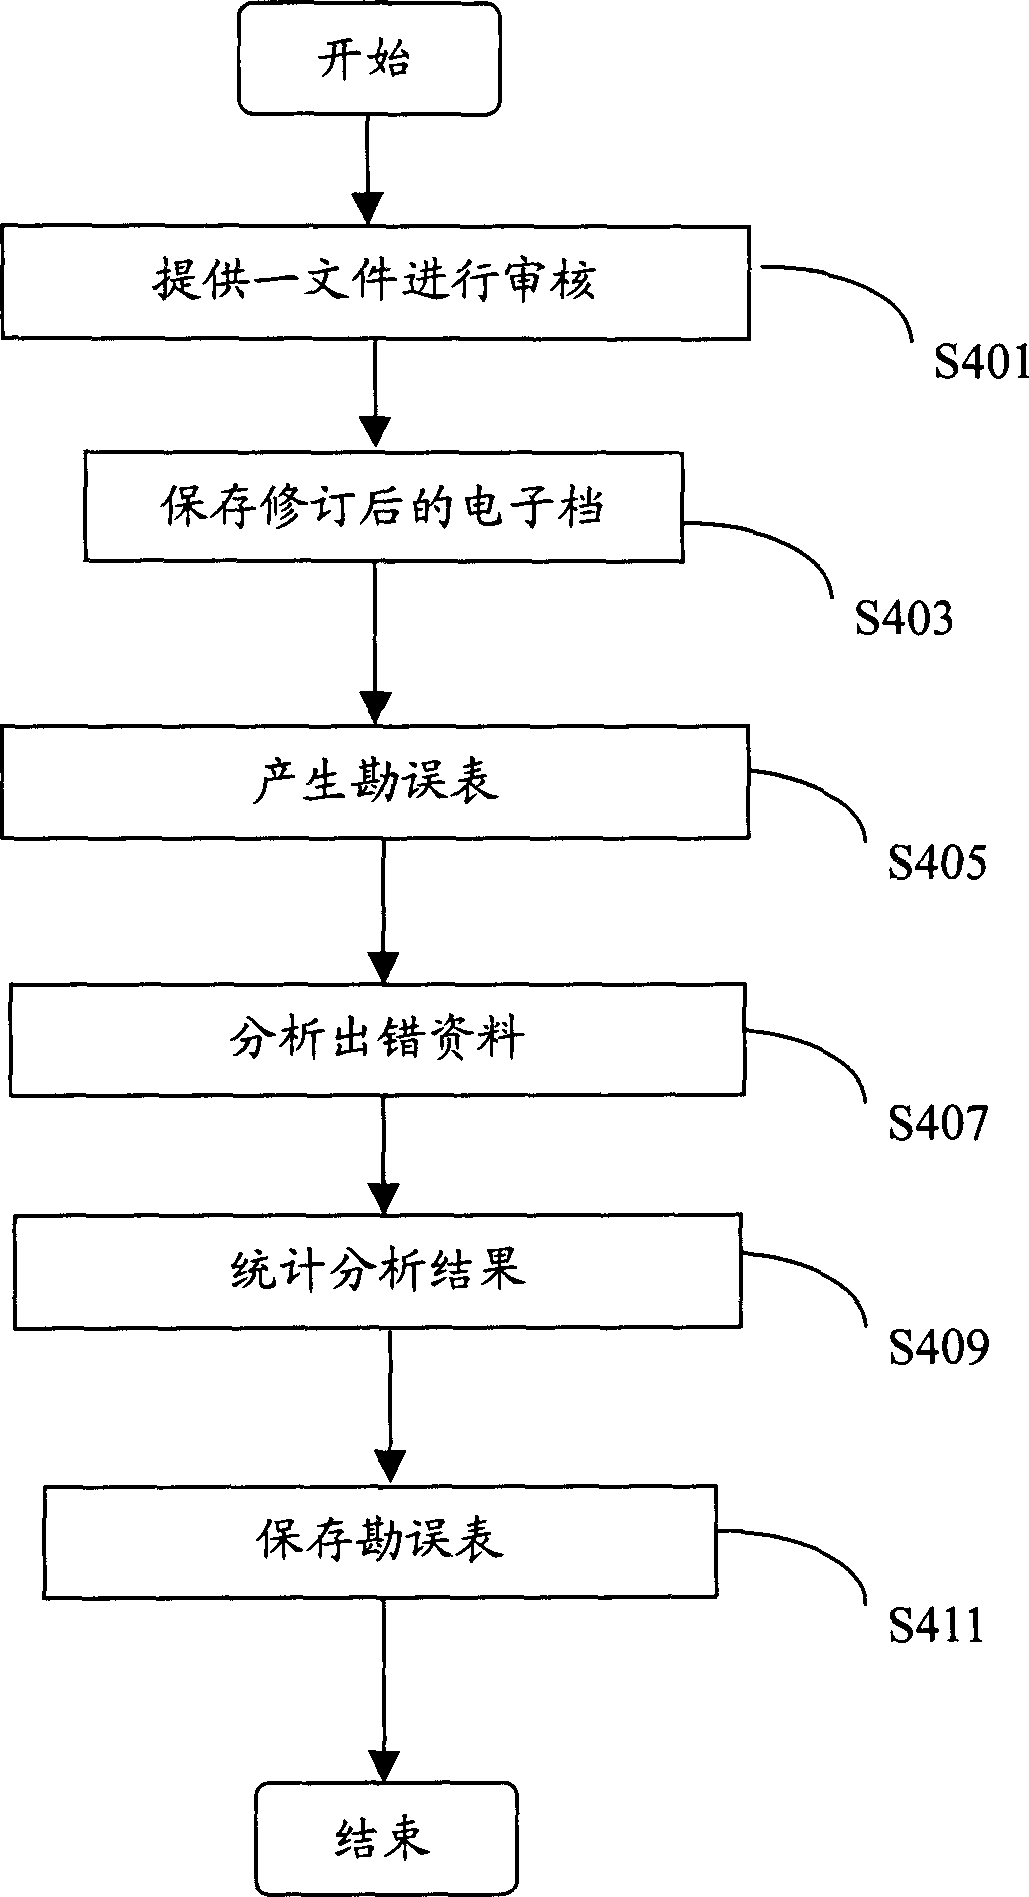 Automatic error-list generating system and method